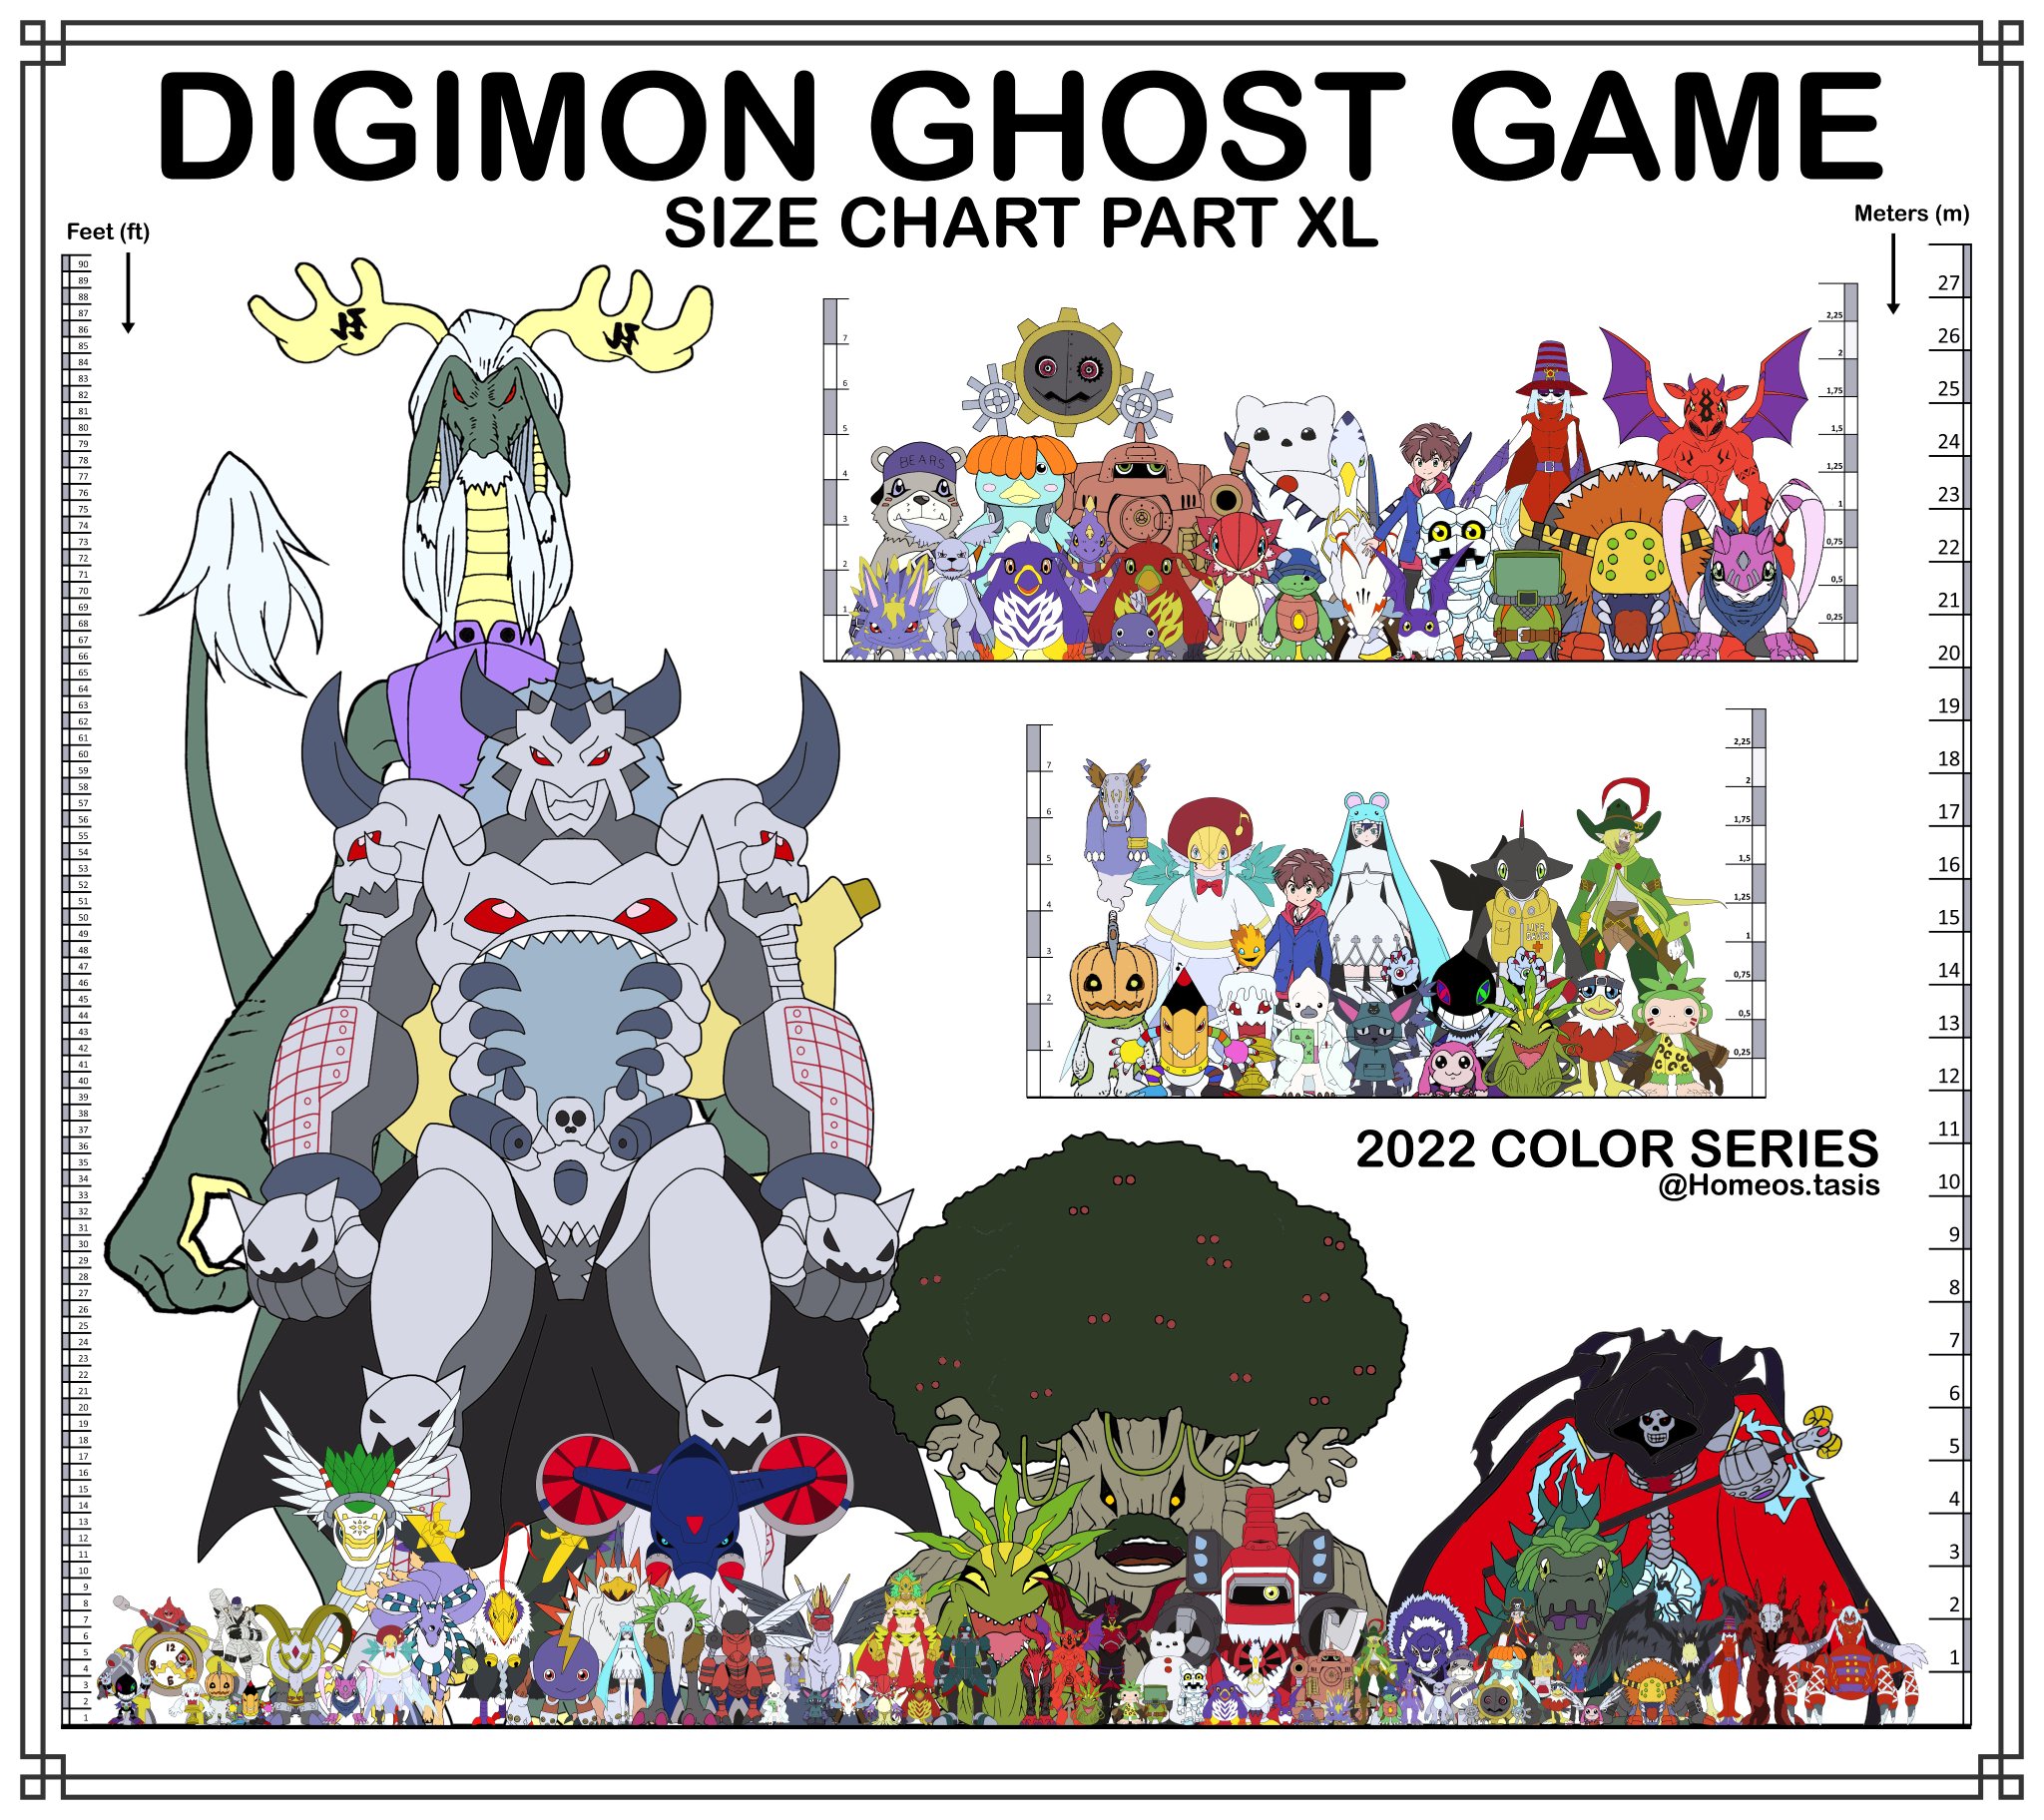 Homeos.tasis on X: WEB UPDATE! 🎉💛 DIGIMON GHOST GAME (Ep. 01-35) 👉👉   👈👈  ------------------------------------------------------- Let me know if  there is any mistake! #Digimon #デジモン #digimonsize #digimonghostgame #art